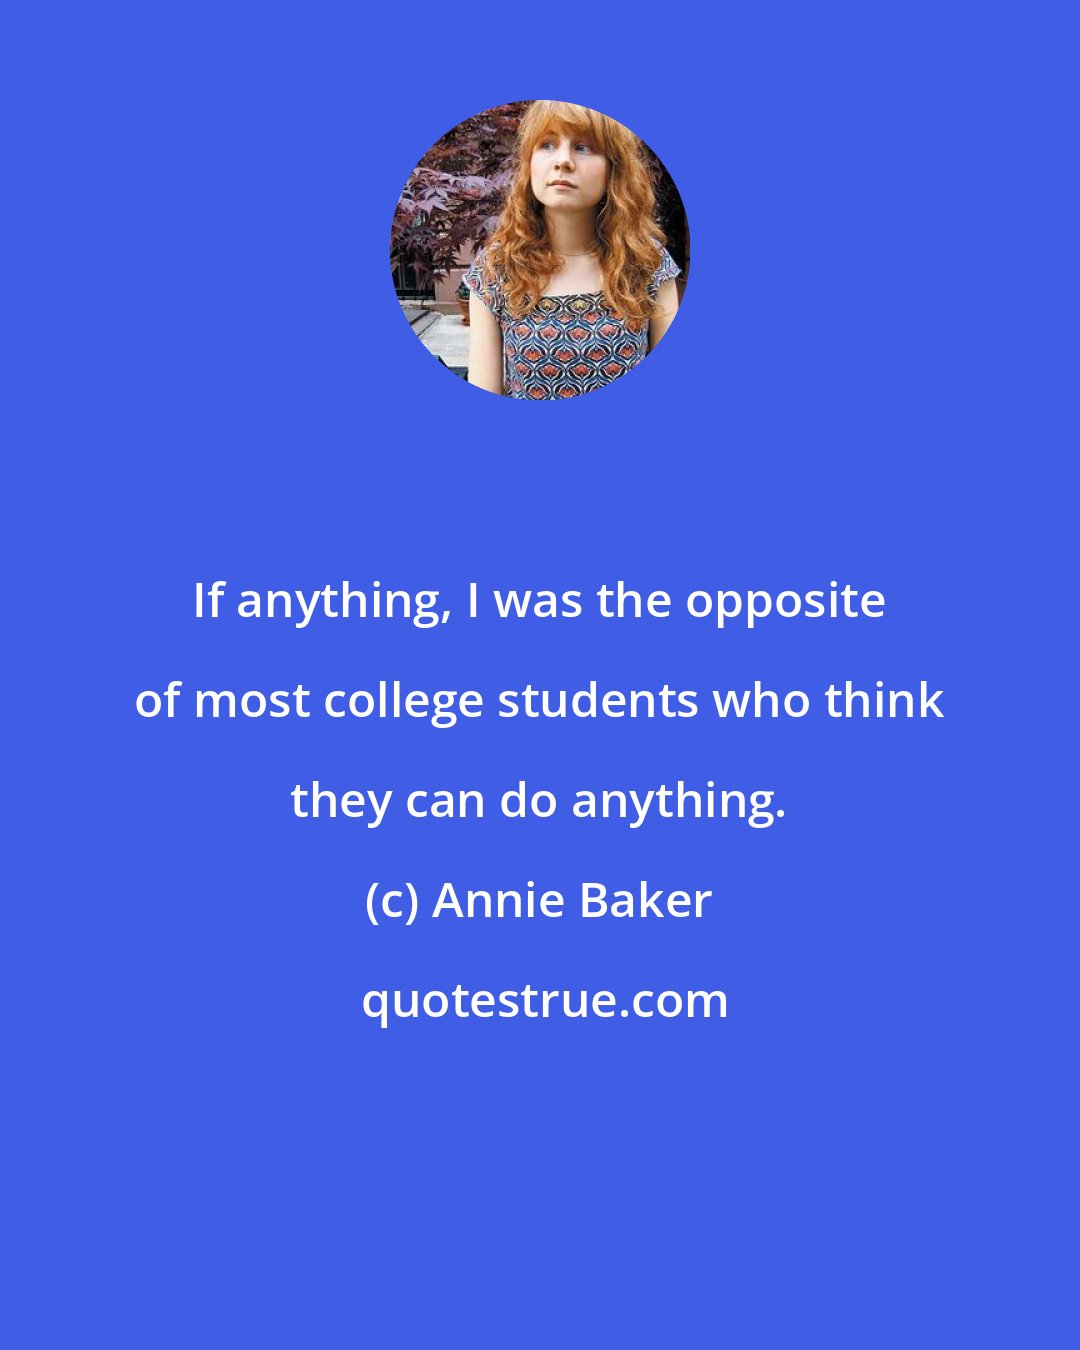 Annie Baker: If anything, I was the opposite of most college students who think they can do anything.